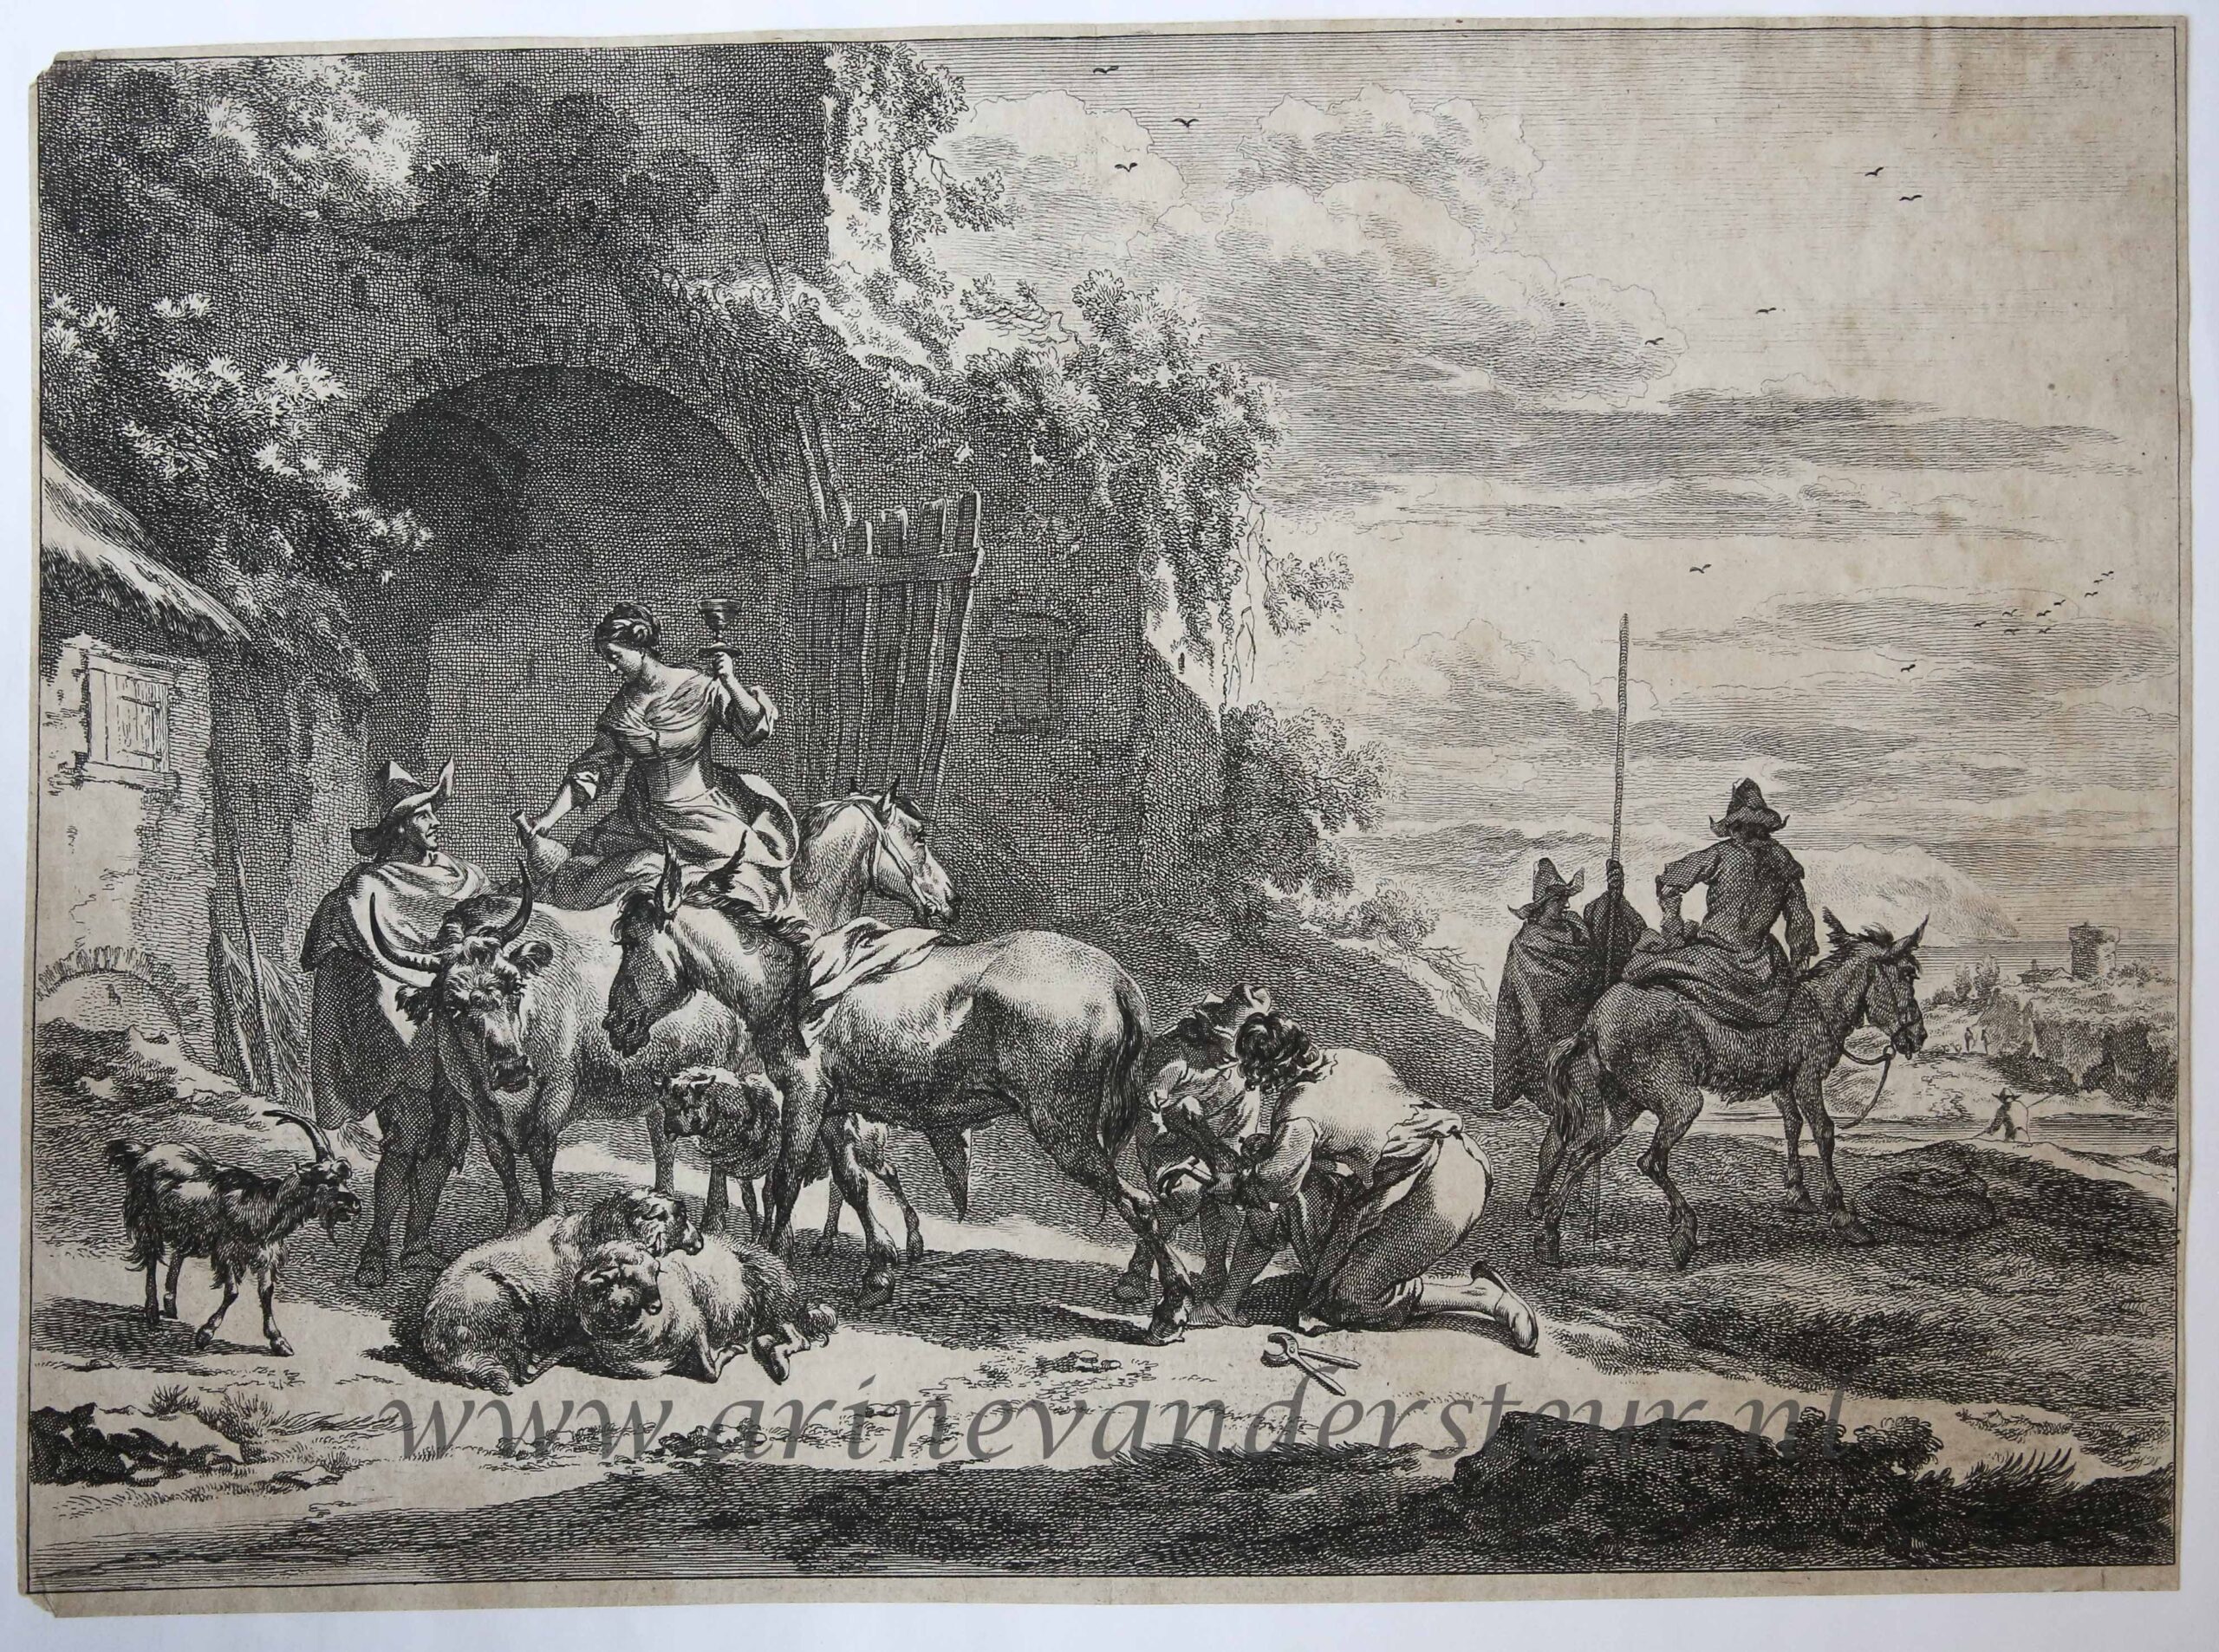 [Antique print, etching and engraving] Farrier shoeing a donkey/Hoefsmid beslaat een ezel, ca 1650-1700.